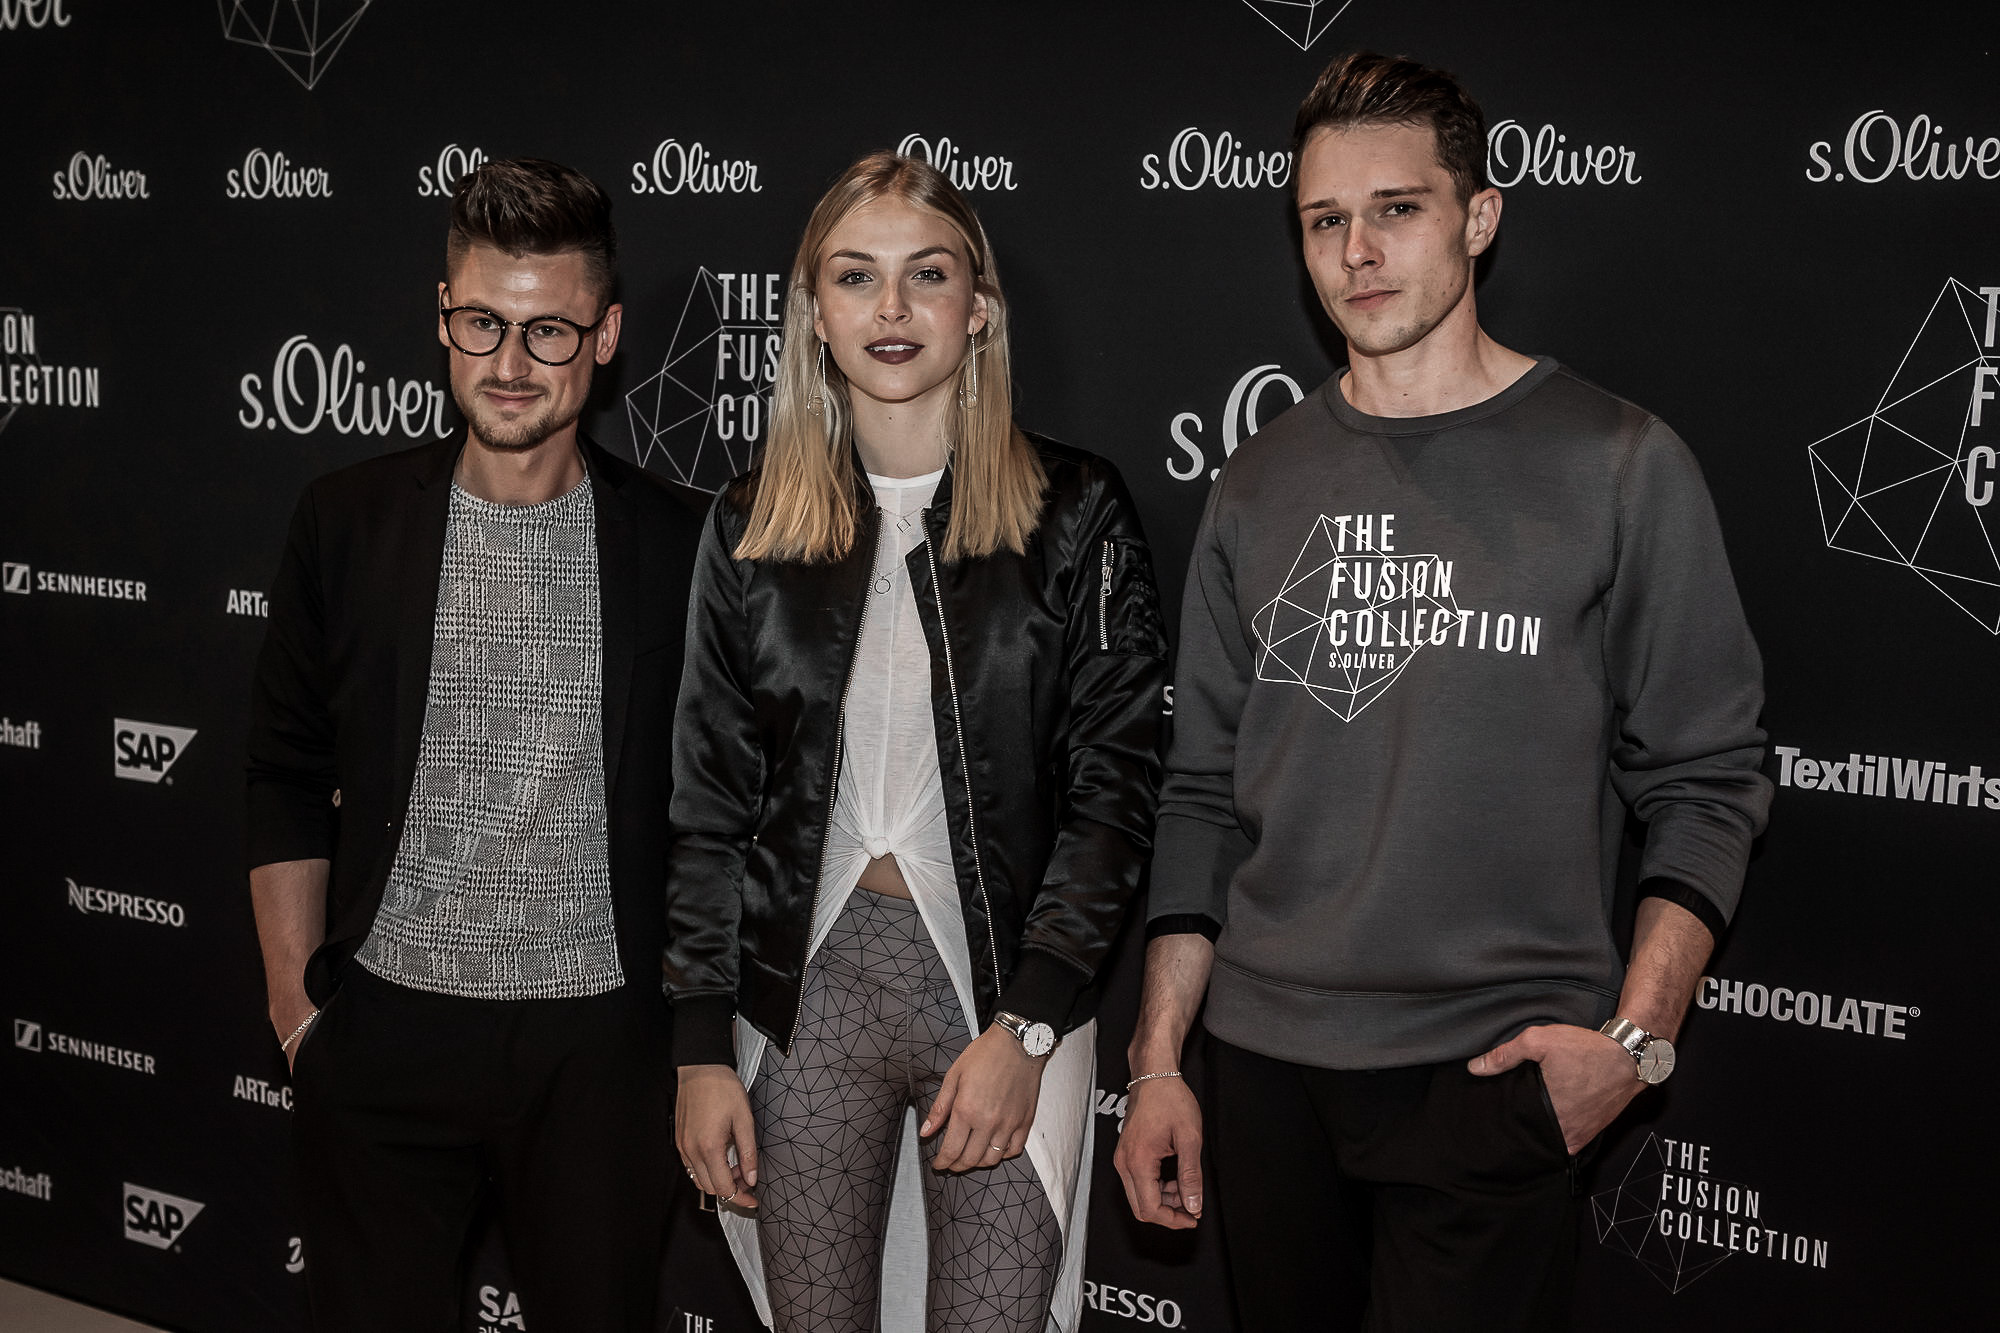 Tommeezjerry-Maennermodeblog-Maennermode-Fashionblog-Styleblog-Berlinblog-soliver-the-fusion-collection-casual-streetstyle-jogger-suit